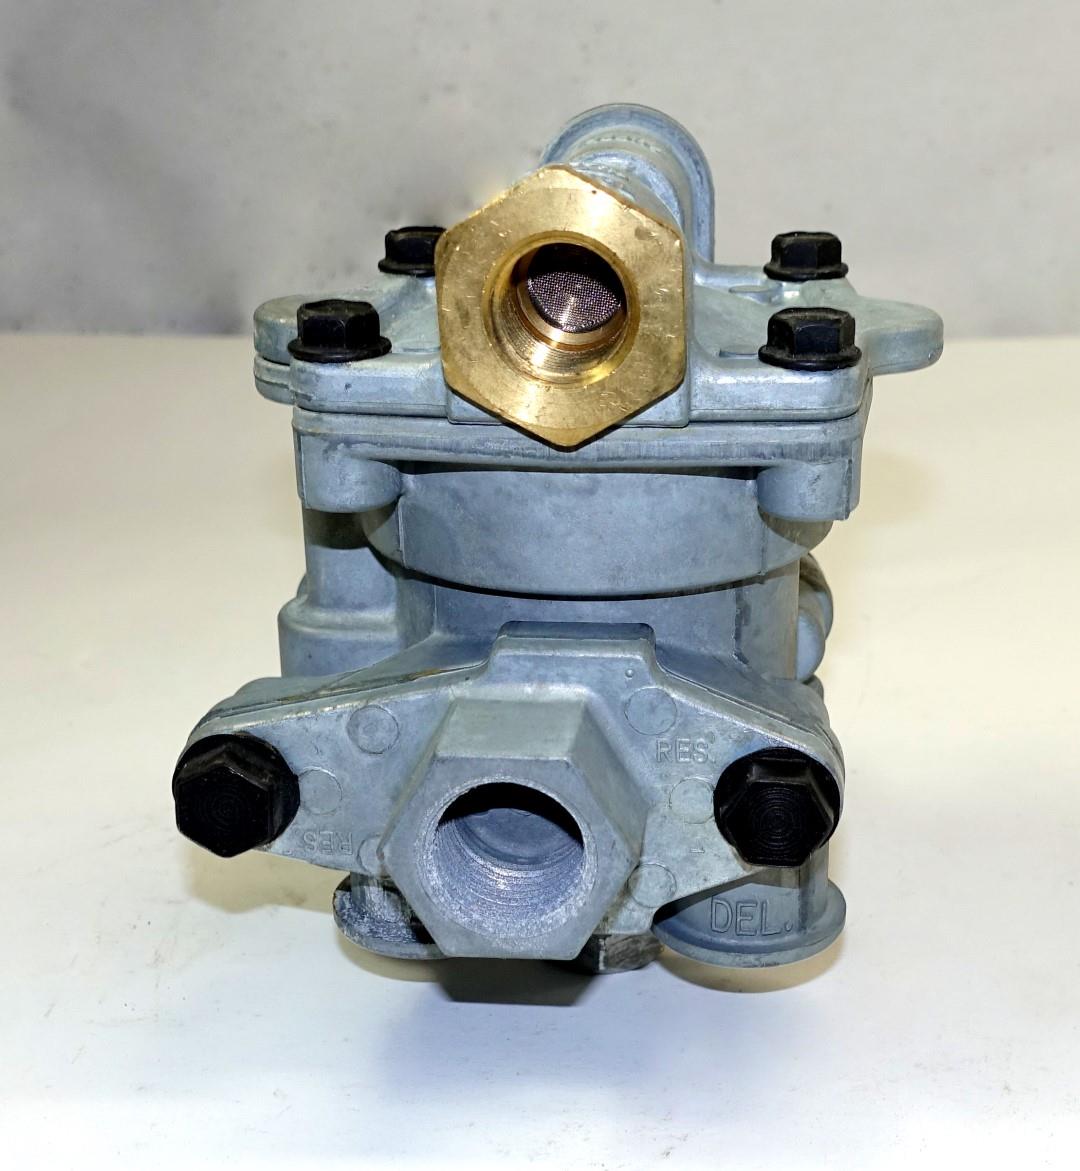 SP-1989 | 2530-01-358-6041 Spring Brake Control Valve for Commercial Trucks and Trailers NOS (8).JPG